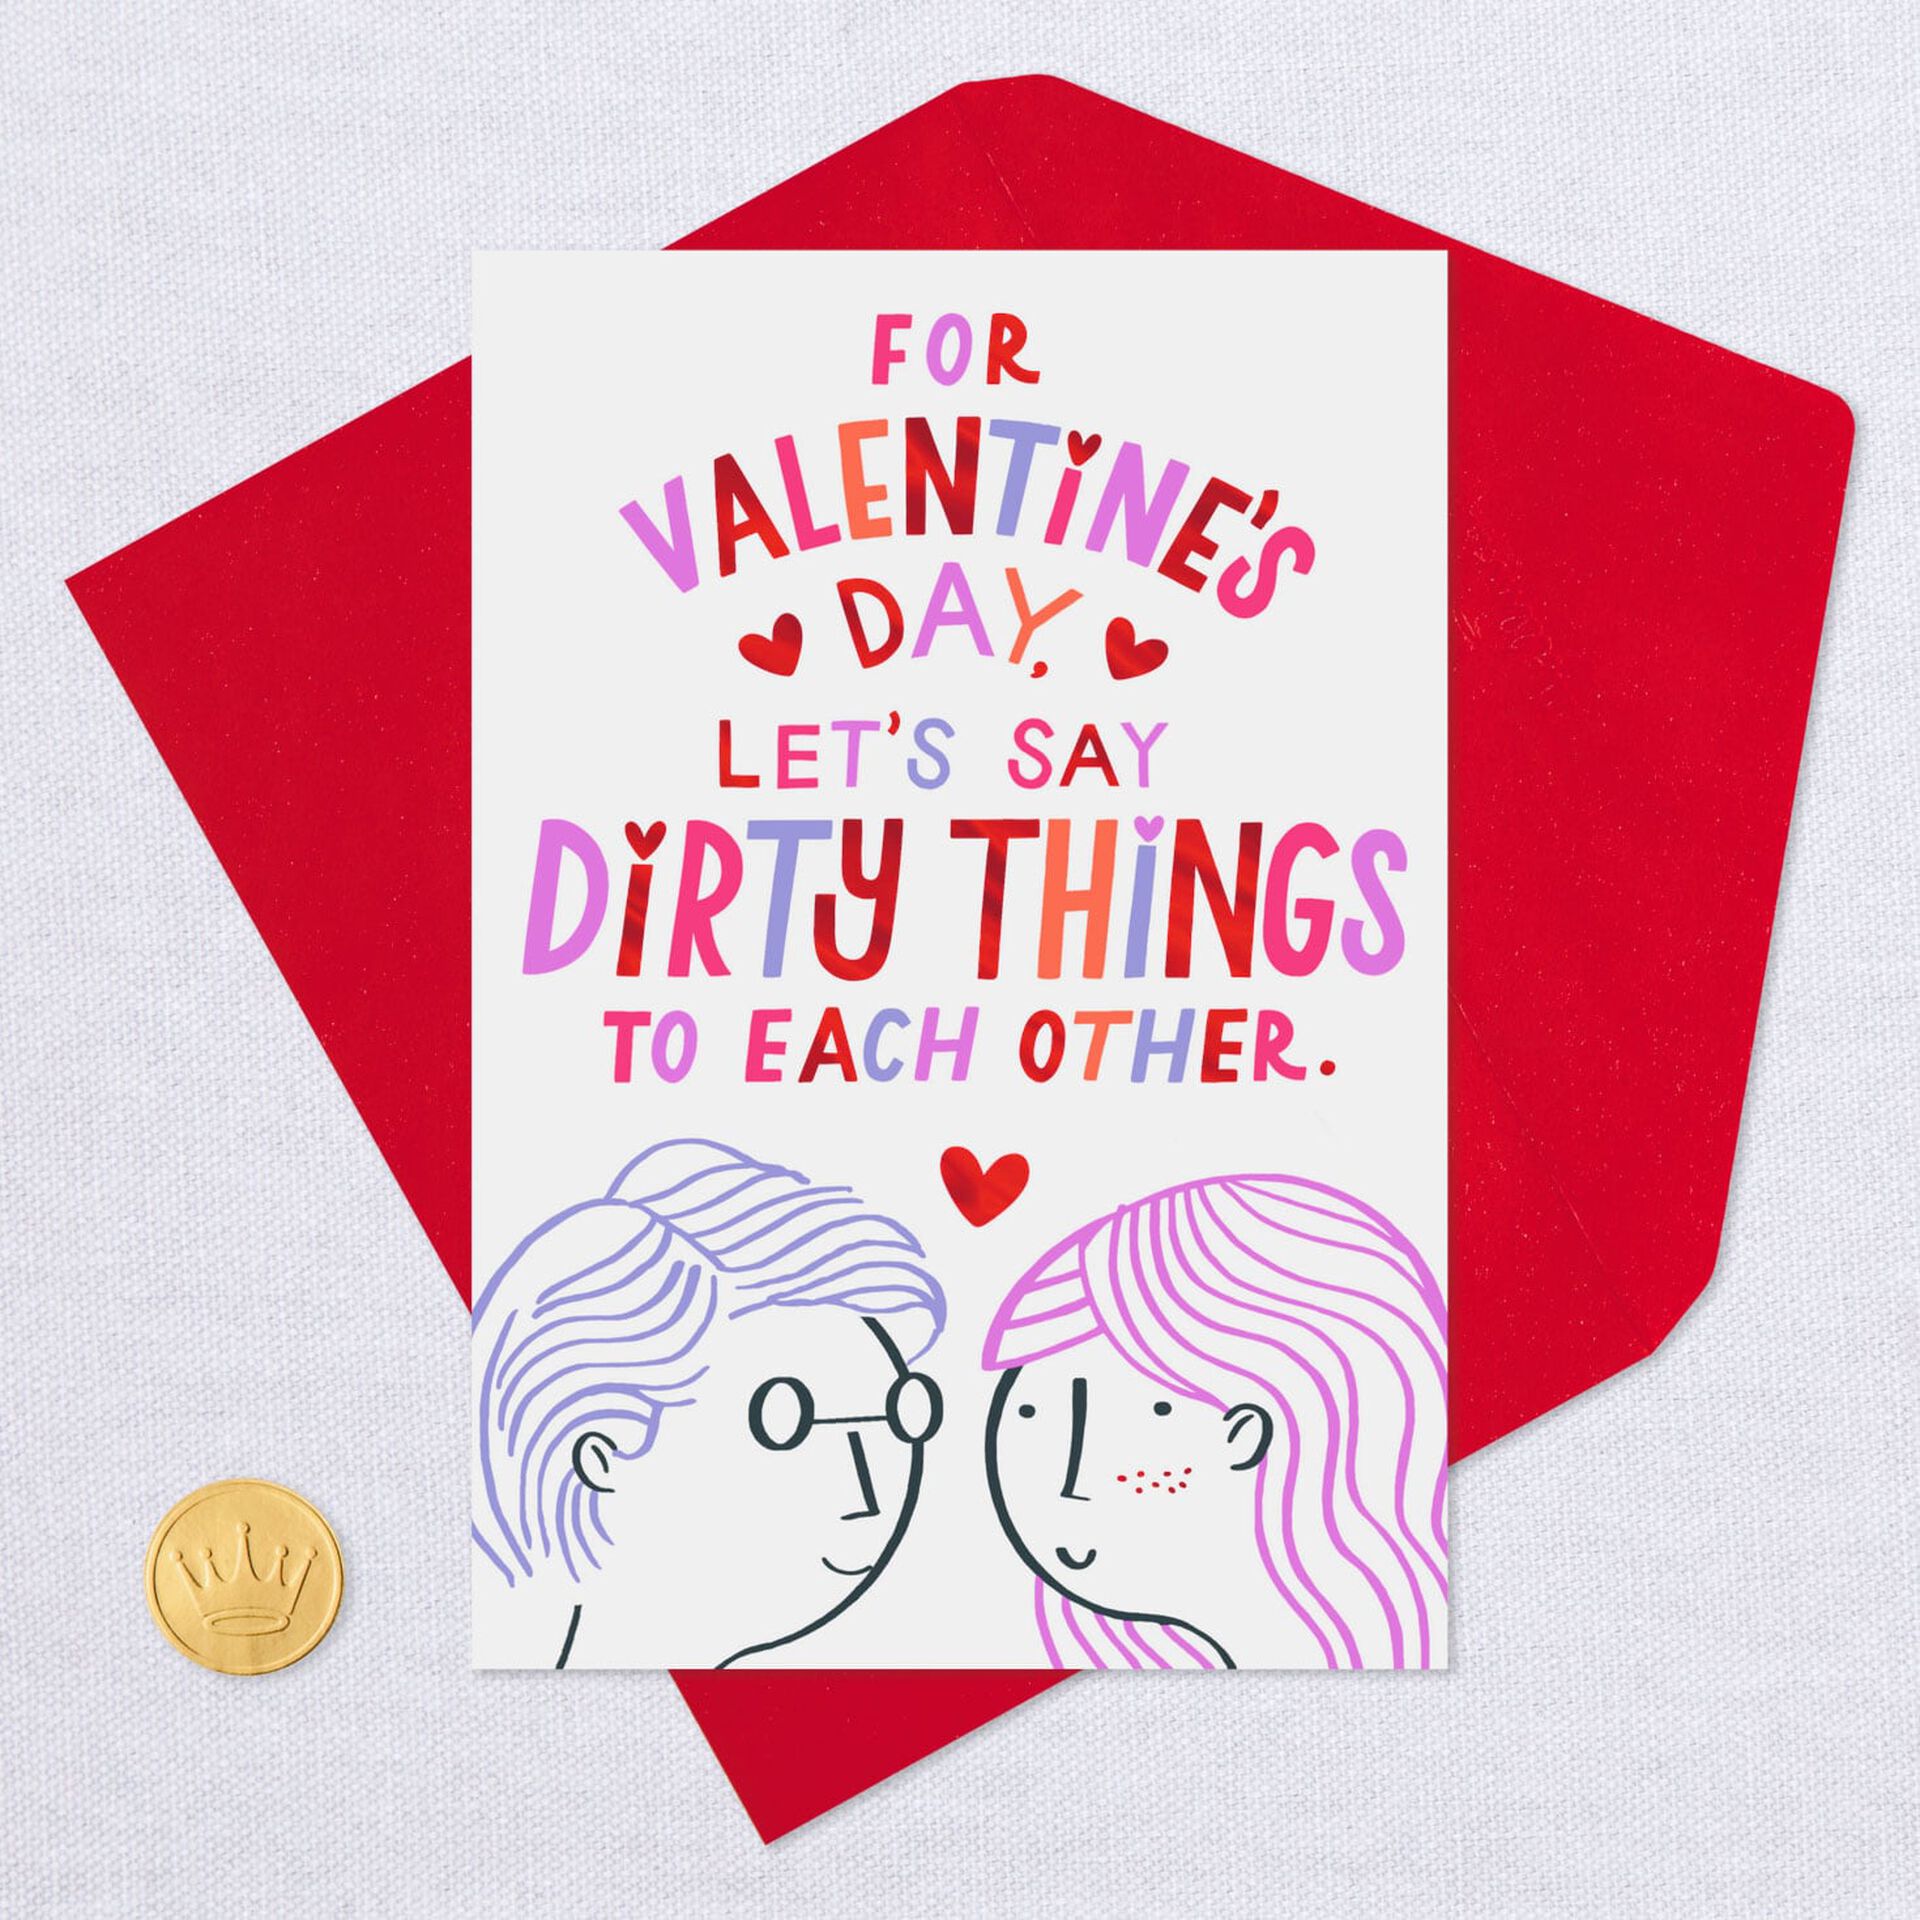 let-s-talk-dirty-funny-valentine-s-day-card-greeting-cards-hallmark